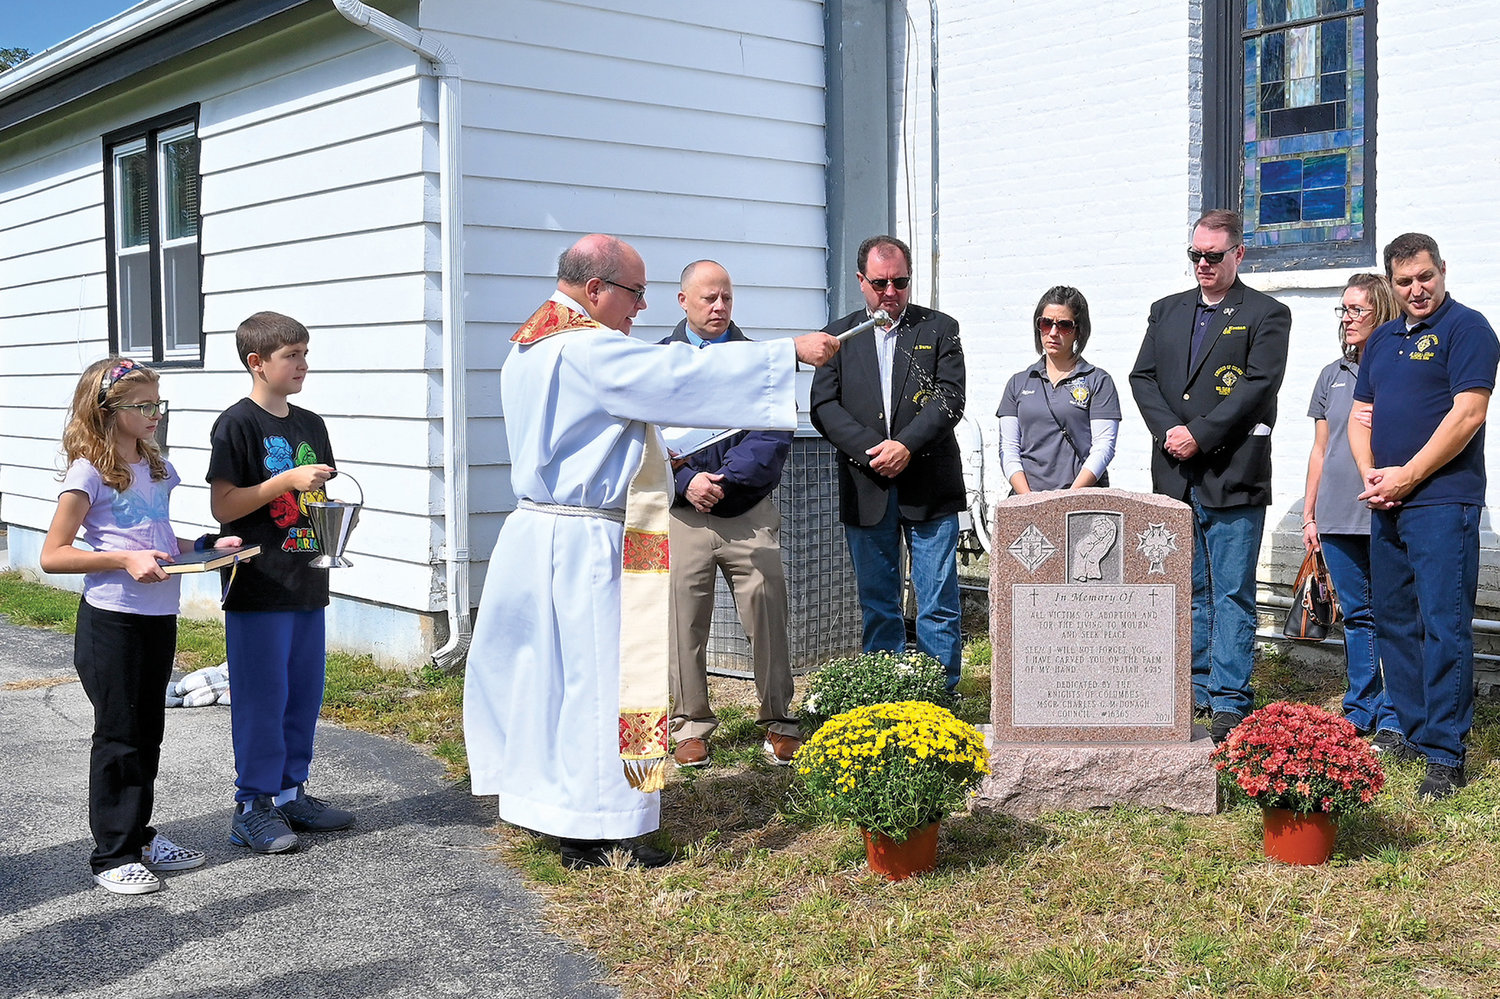 Father Michael Palazzo, pastor of Holy Name of Jesus parish in Otisville and chaplain of Msgr. Charles McDonagh Knights of Columbus Council 16365, blesses a monument dedicated to unborn children at Holy Name of Jesus Cemetery in Otisville Oct. 2.